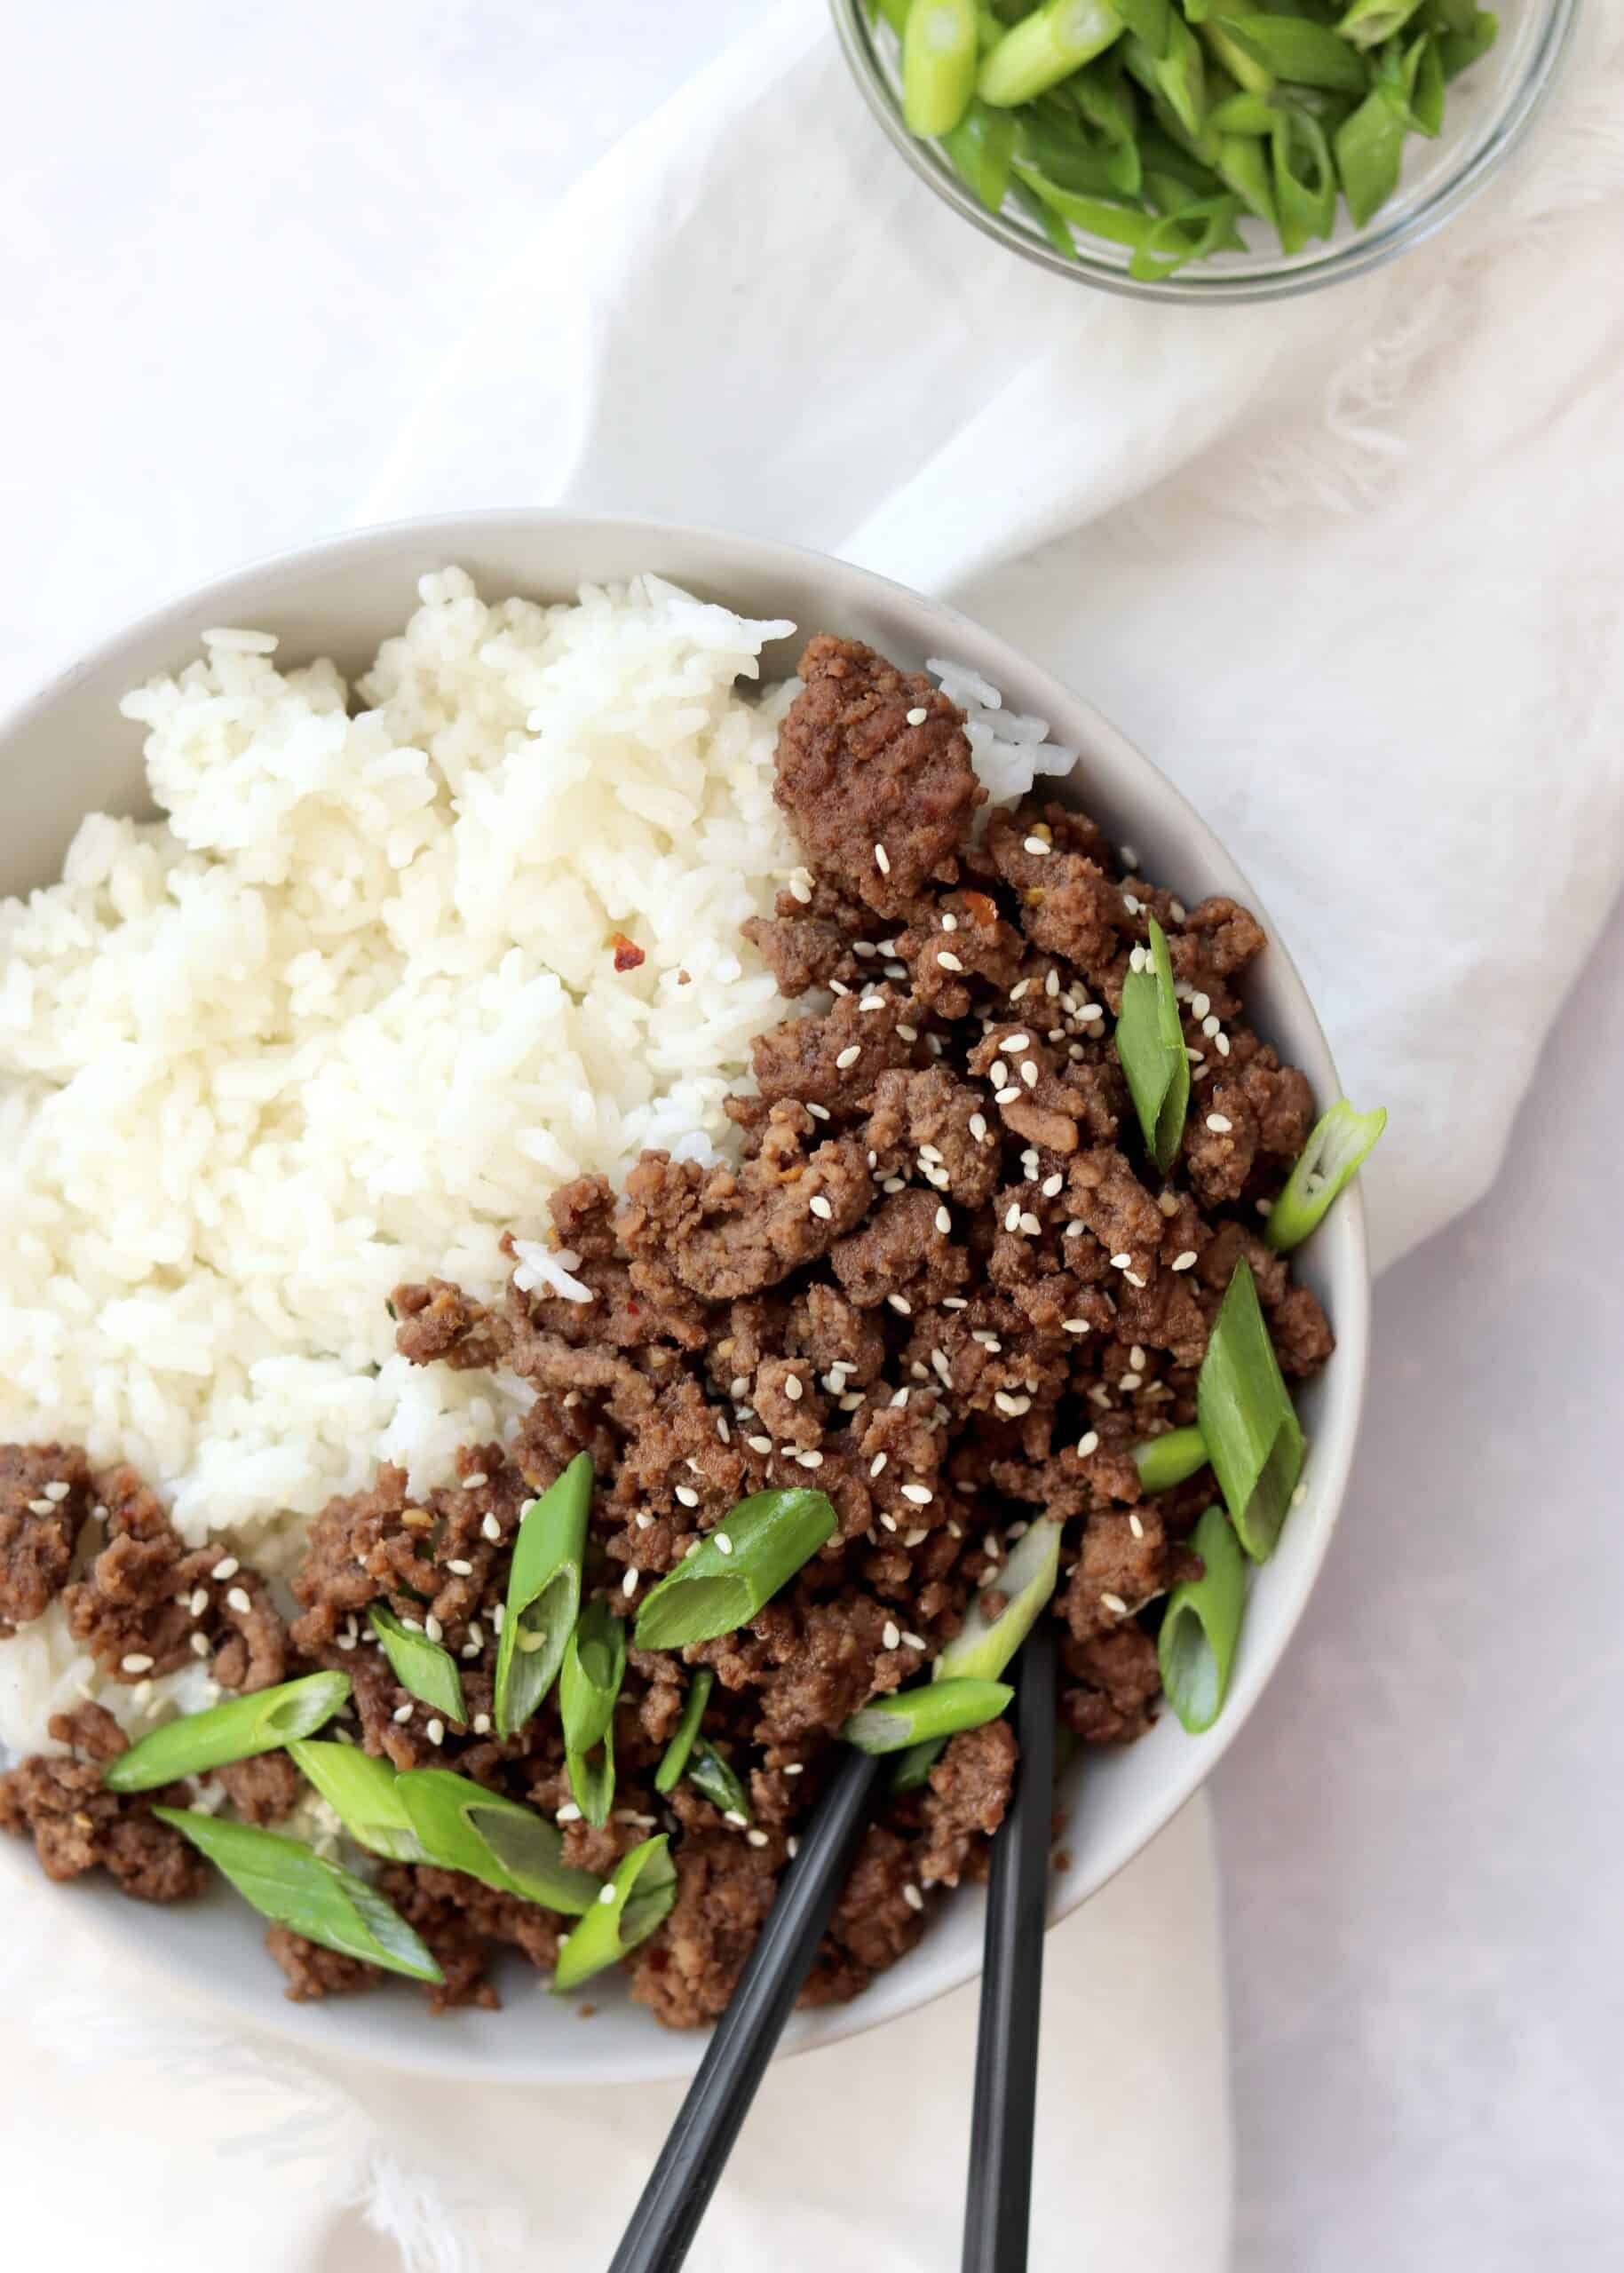 Korean beef bowl with rice